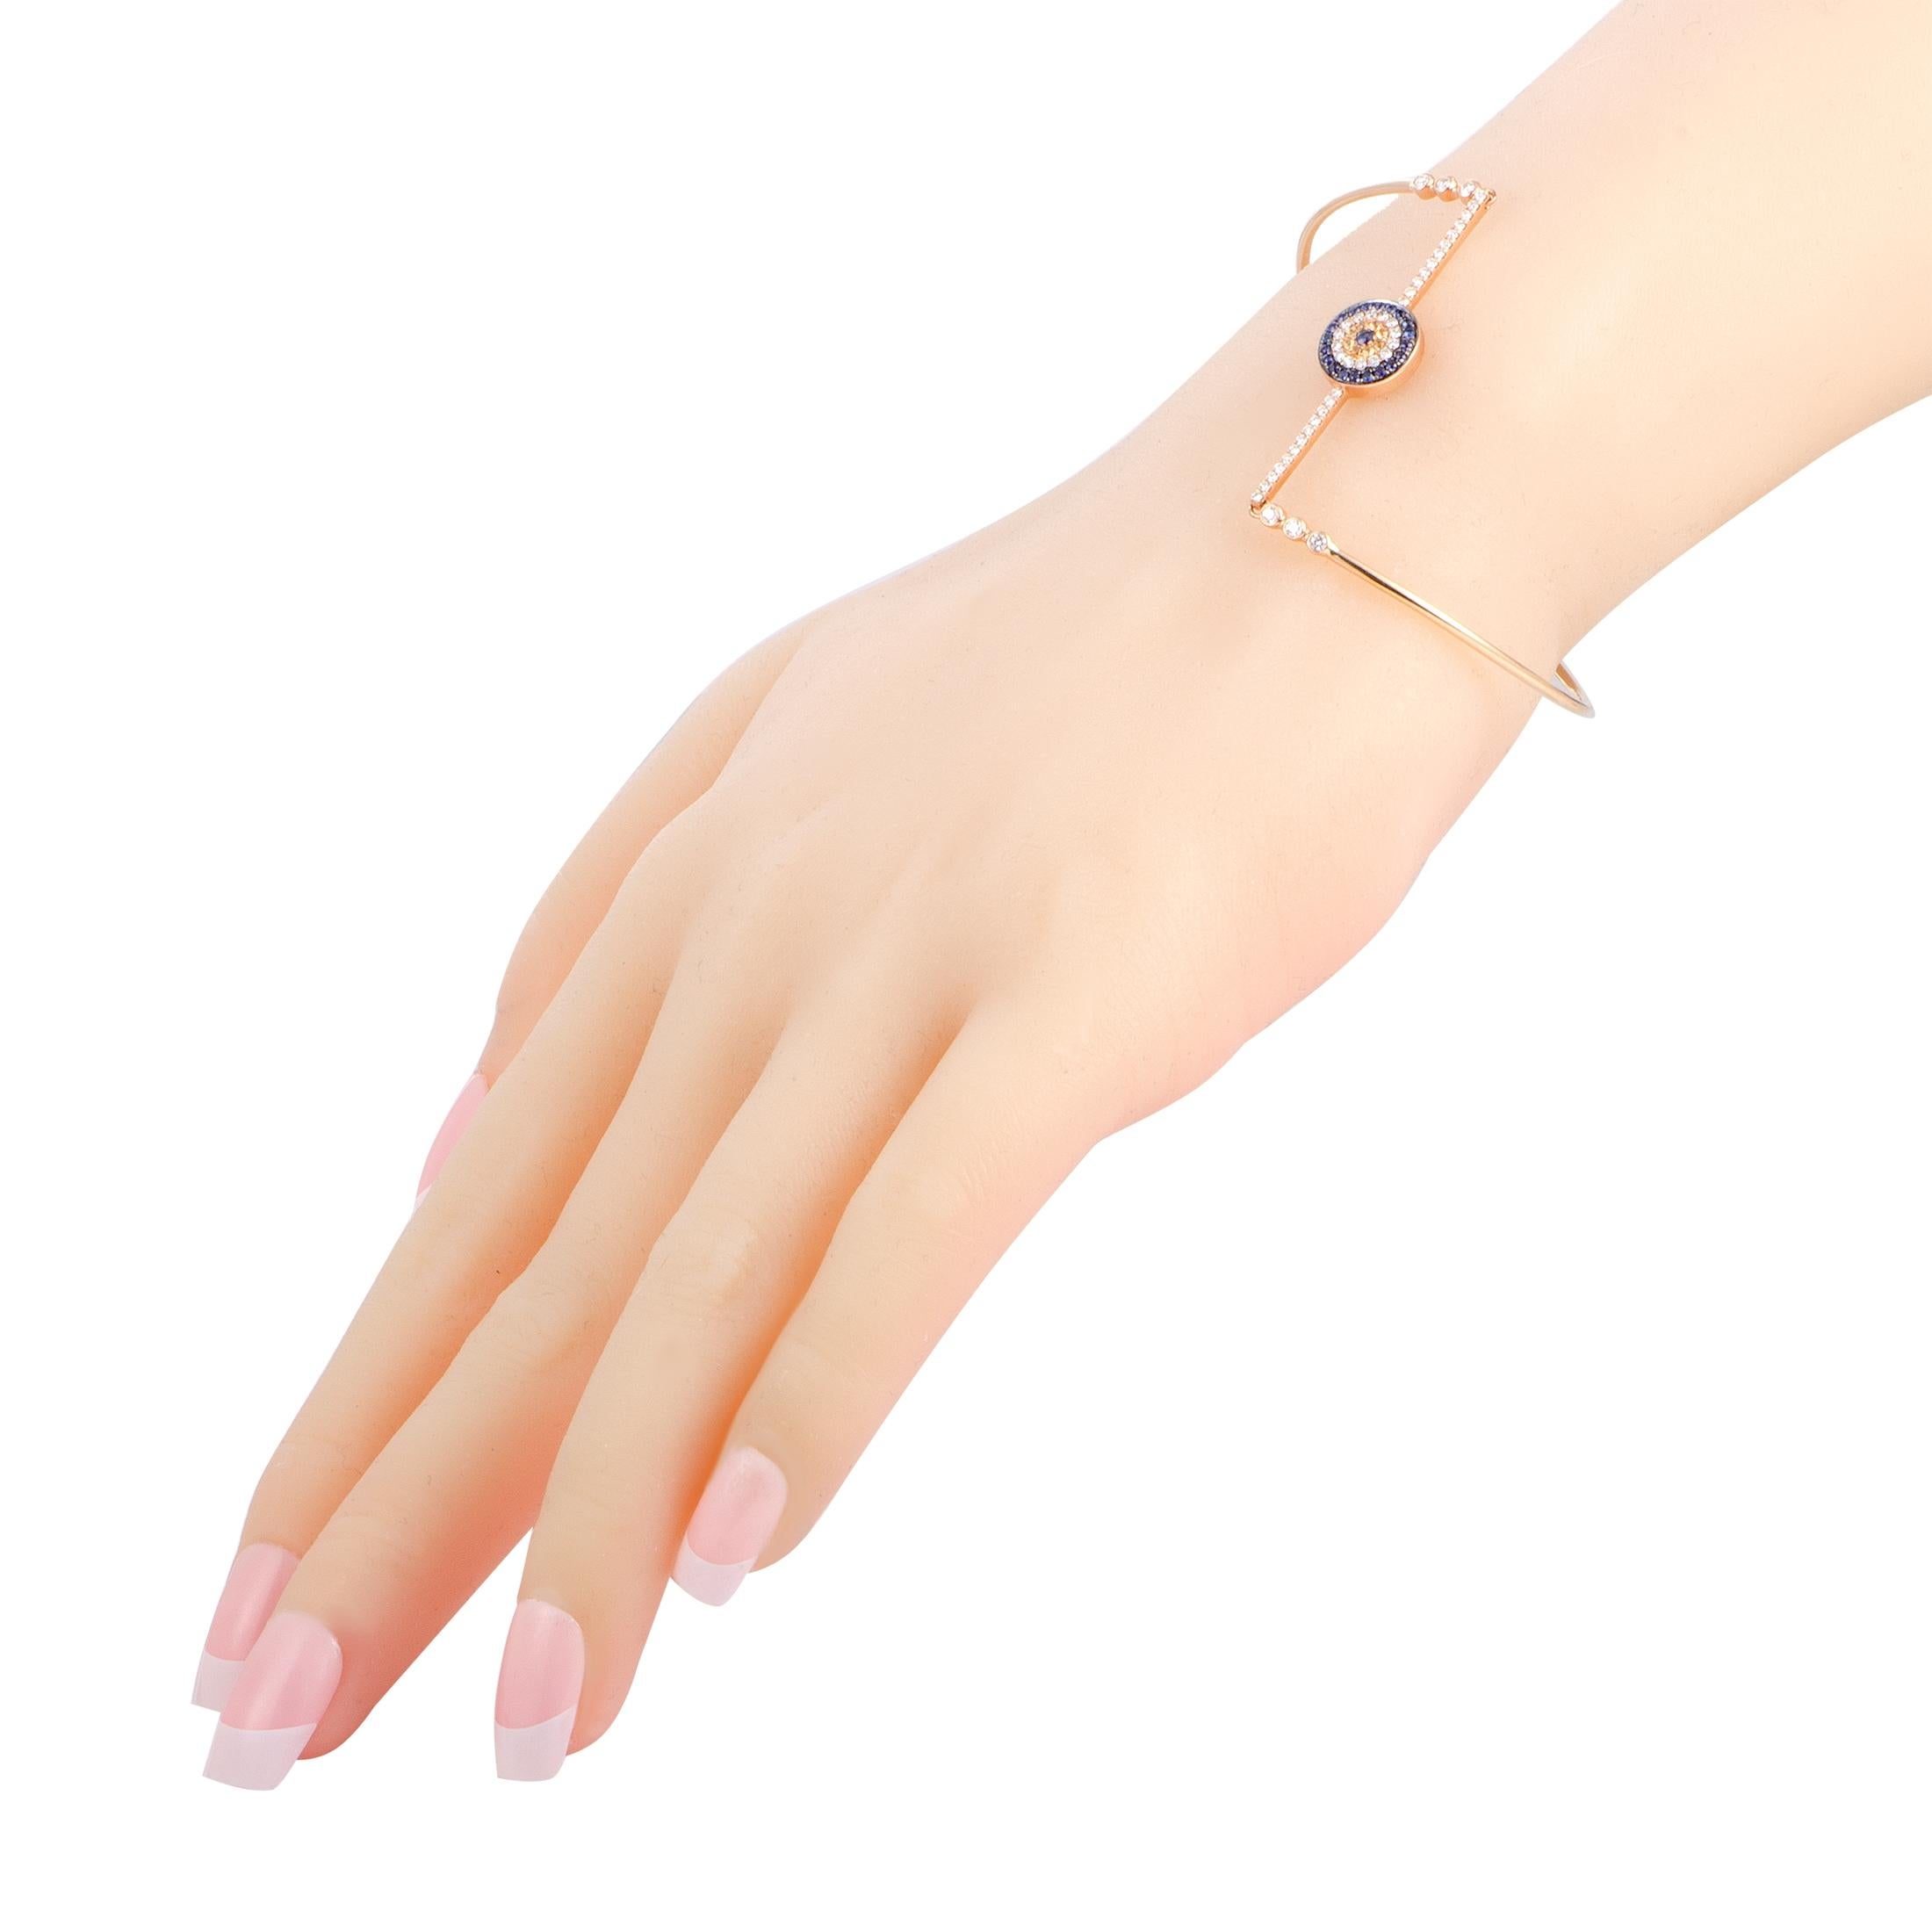 Splendidly designed in an exceptionally offbeat fashion, this alluring bracelet offers an incredibly eye-catching appearance. The bracelet is expertly crafted from enchanting 18K rose gold and it weighs 5.4 grams. The bracelet is beautifully